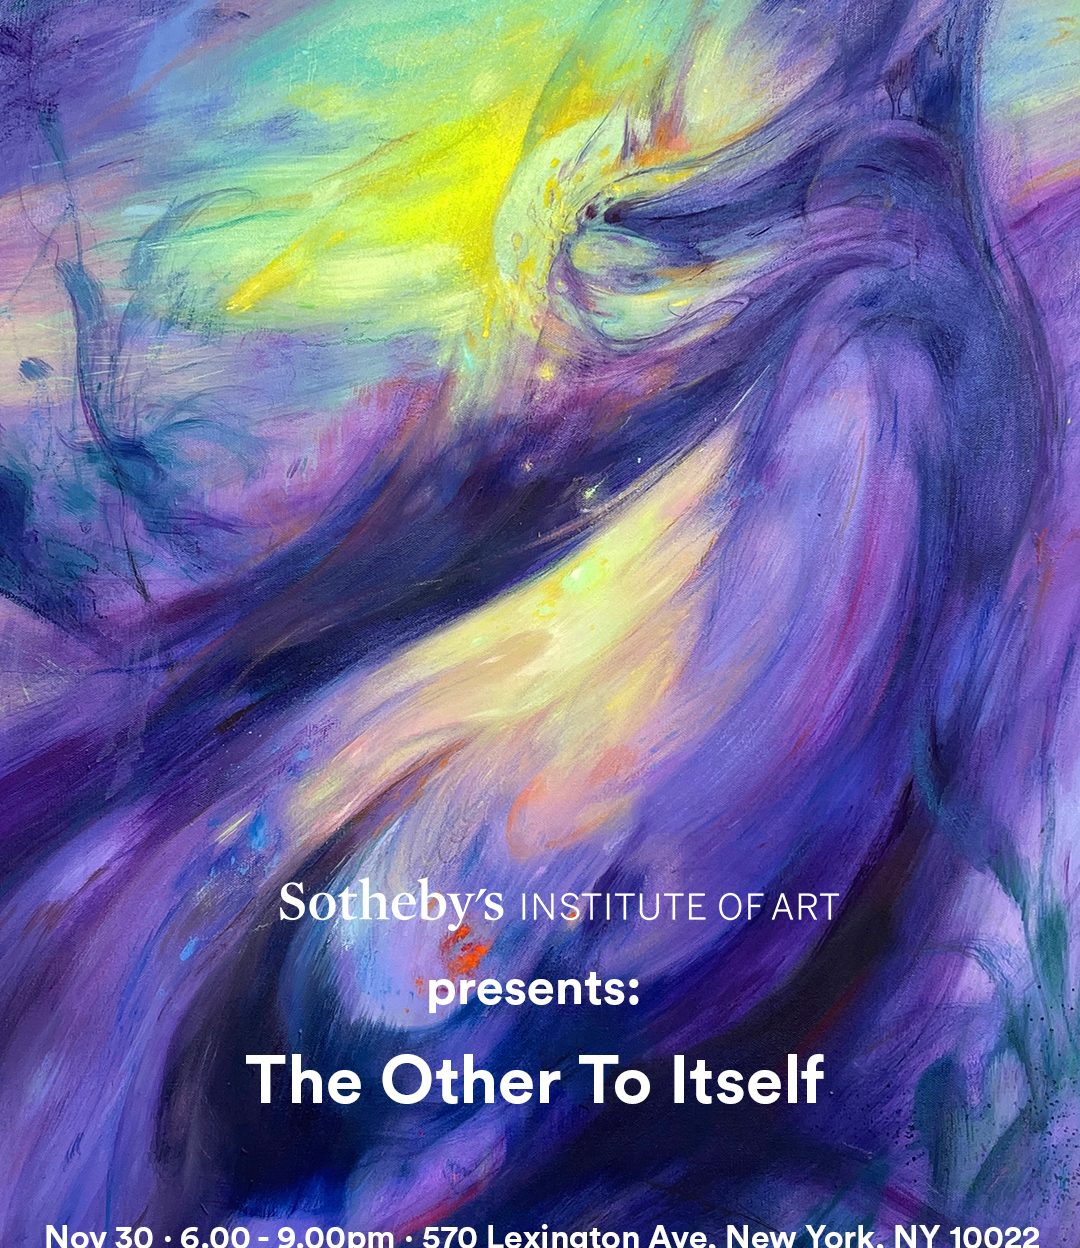 Sotheby’s Institute of Art Presents: The Other To Itself (Opening Reception)